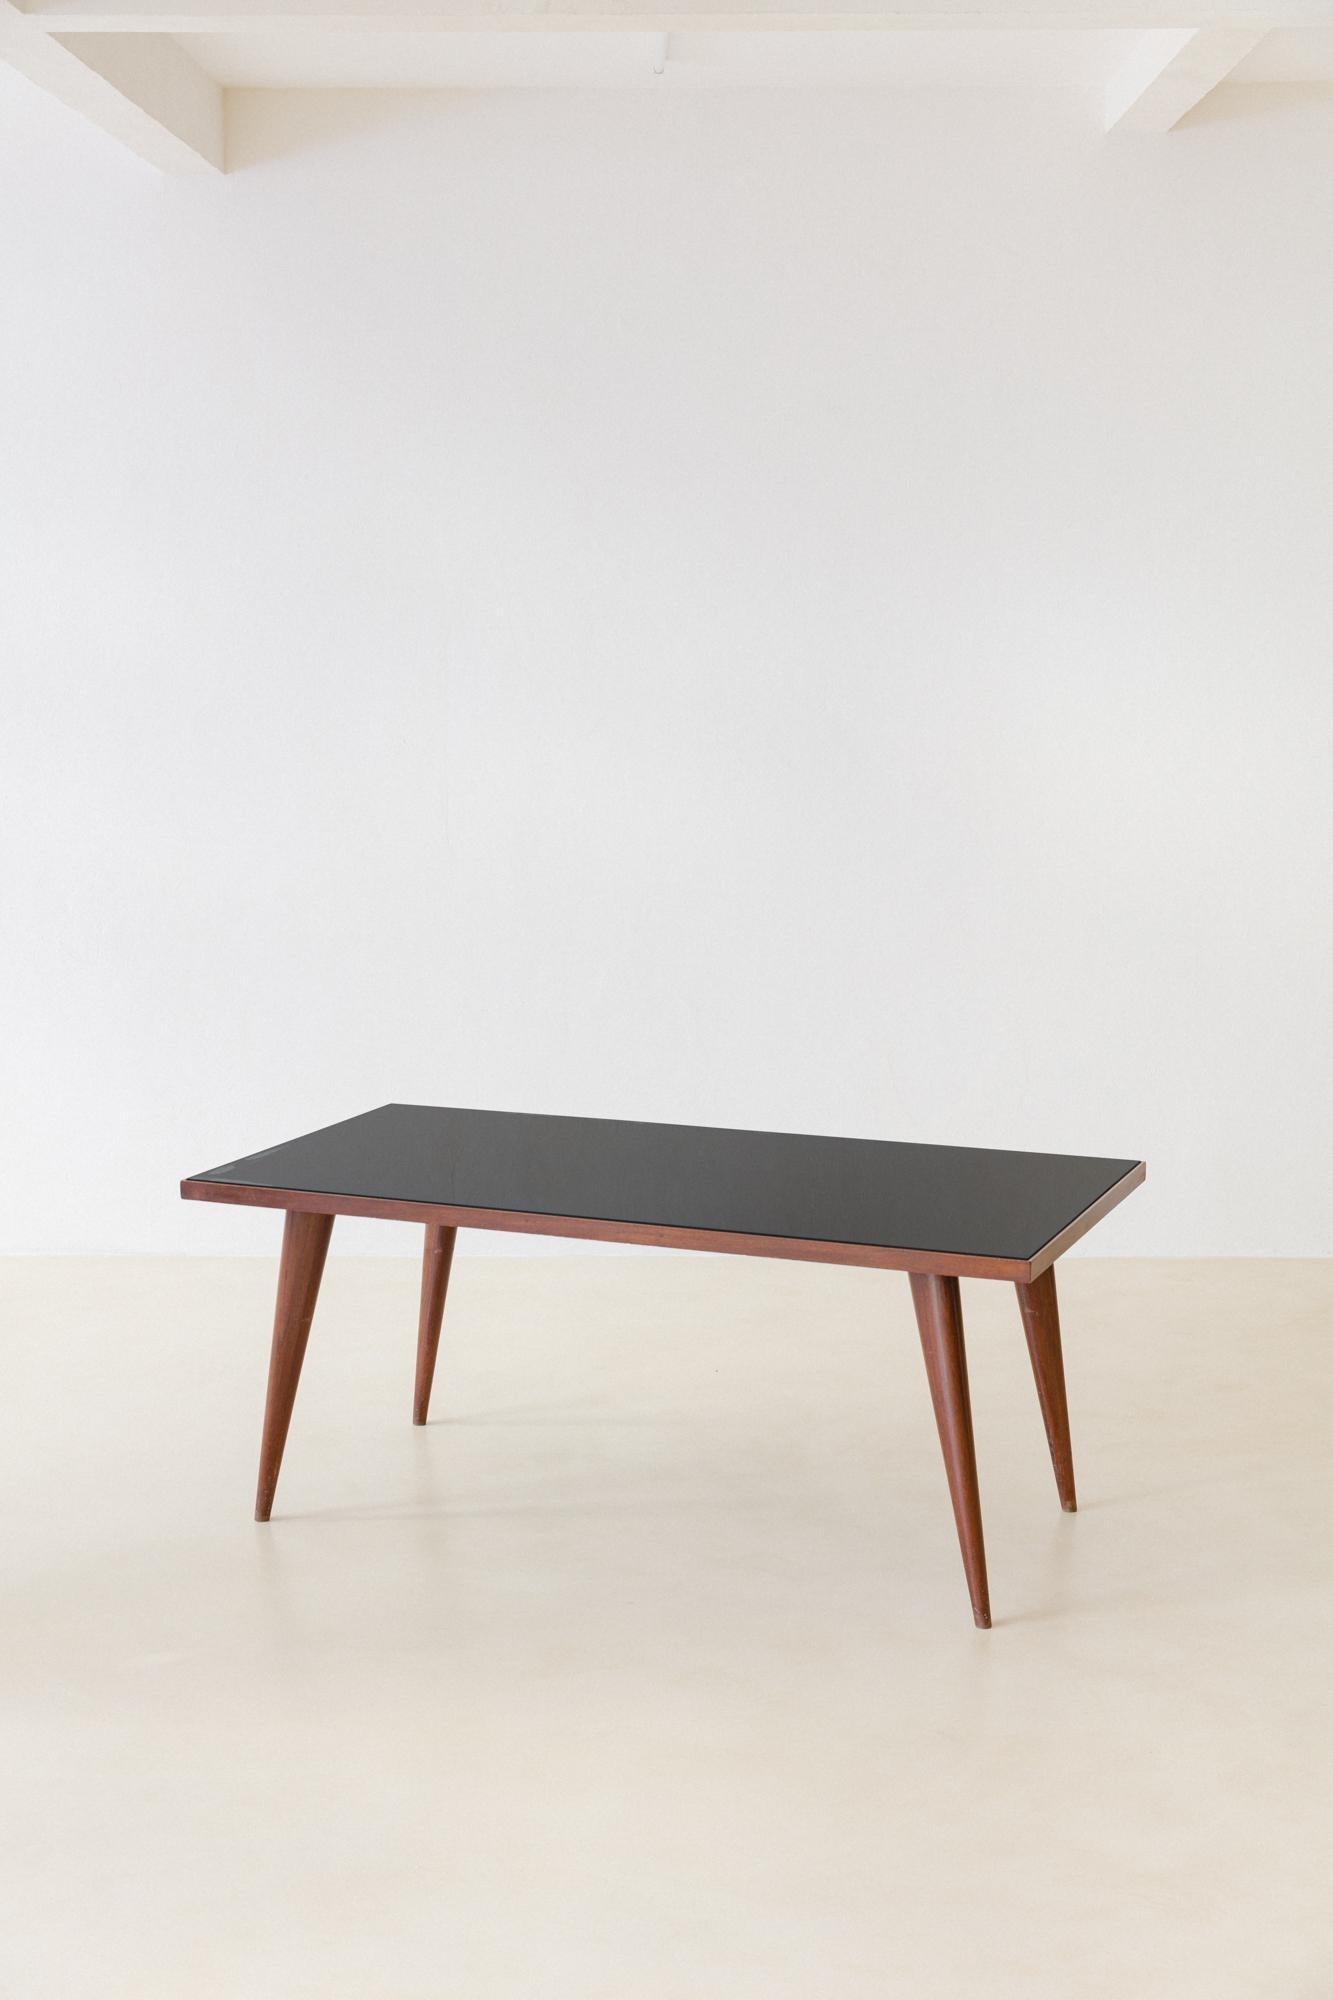 Mid-Century Modern Rosewood Dining Table with Glass Top, Joaquim Tenreiro, 1947, Midcentury Brazil For Sale